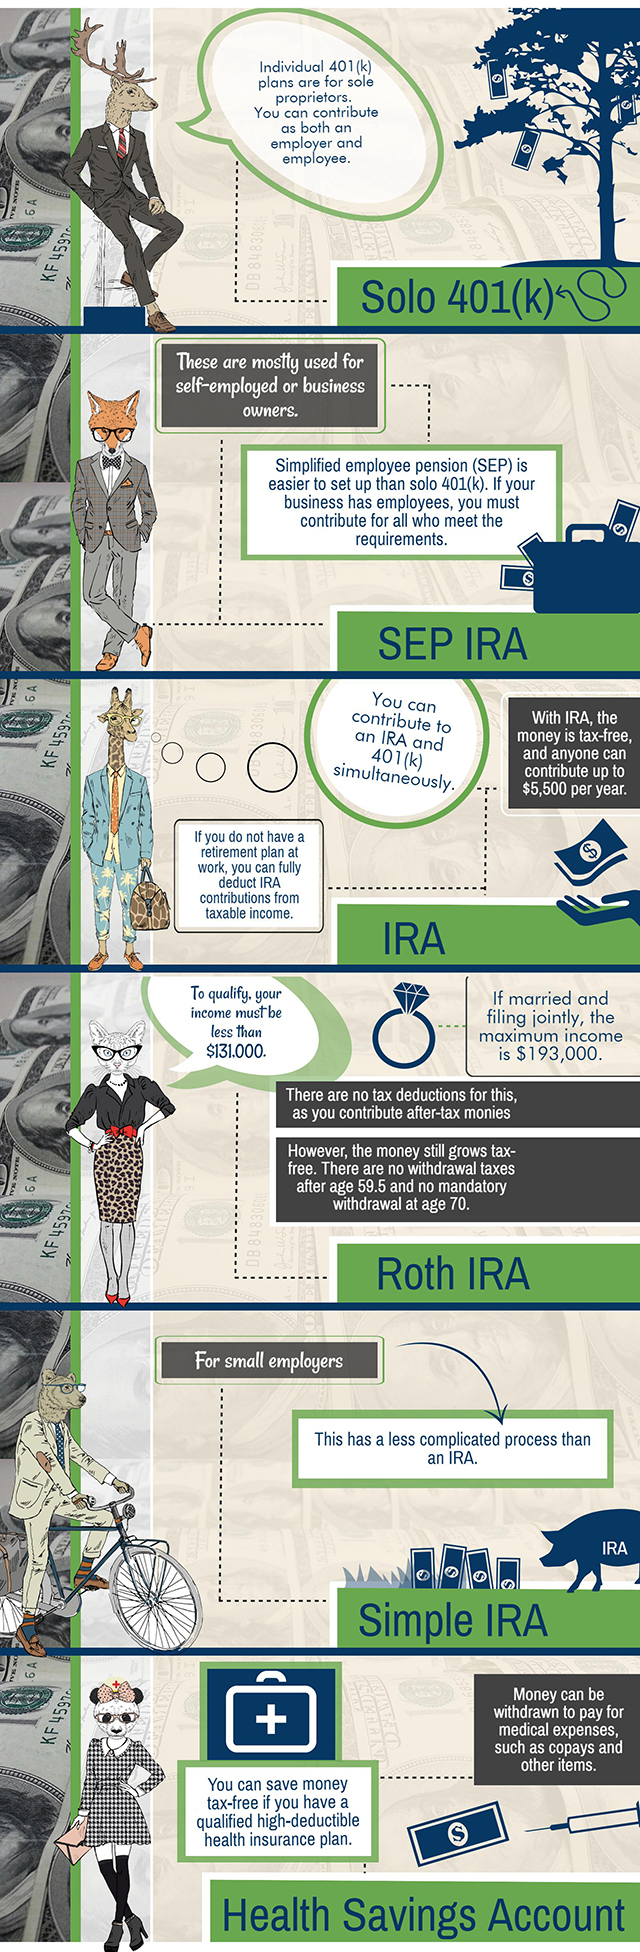 finwell-what-age-should-you-start-saving-for-retirement-infographic